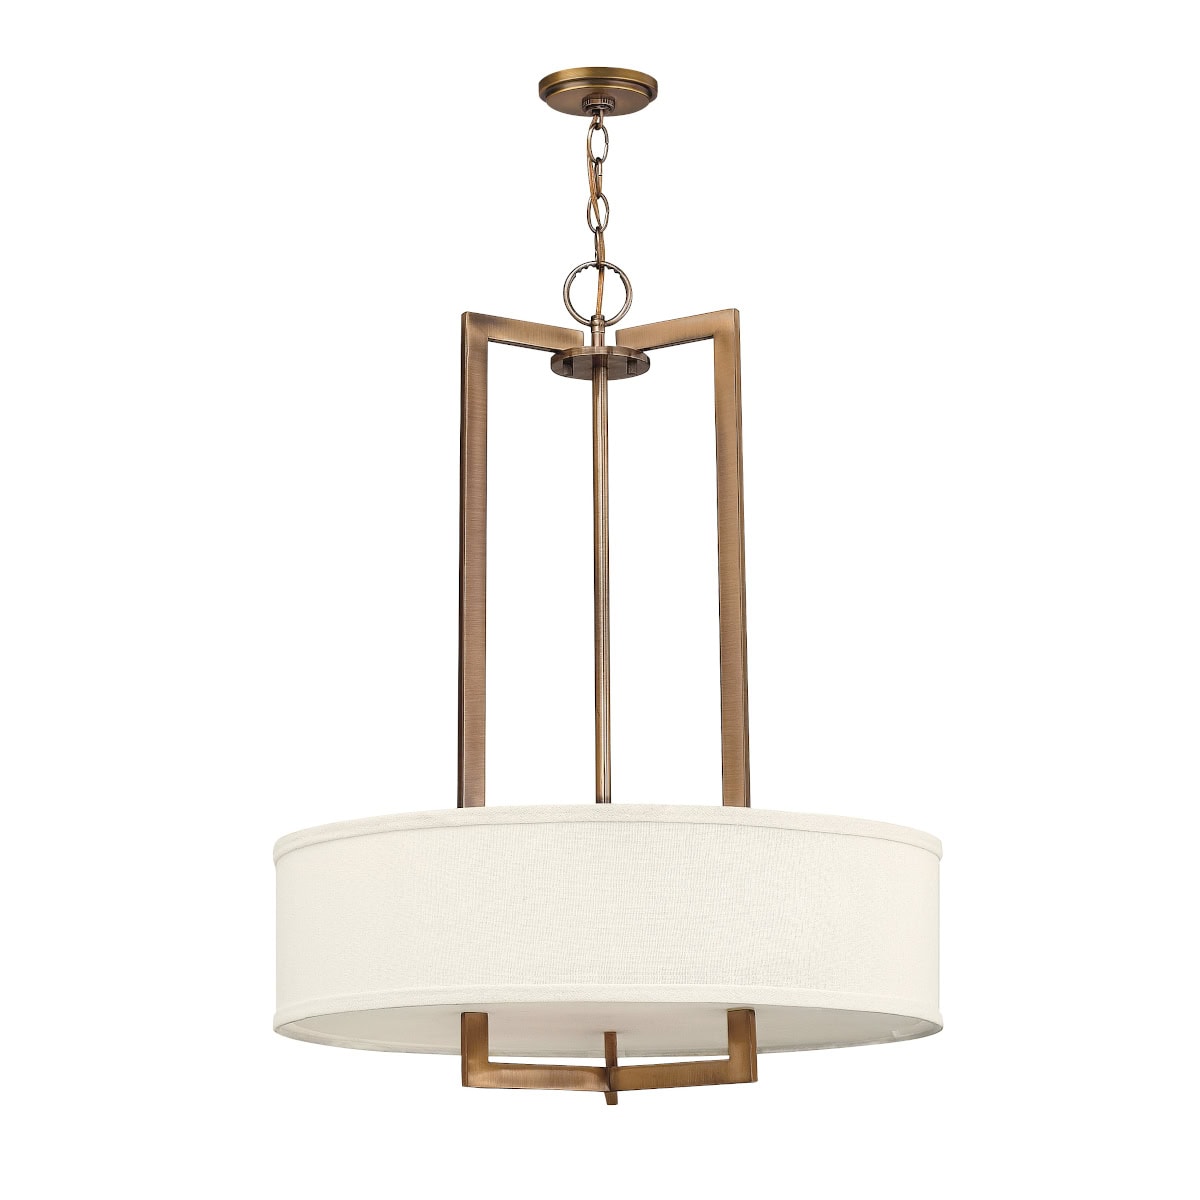 Product image of Hampton Chandelier Brass with Linen Shade